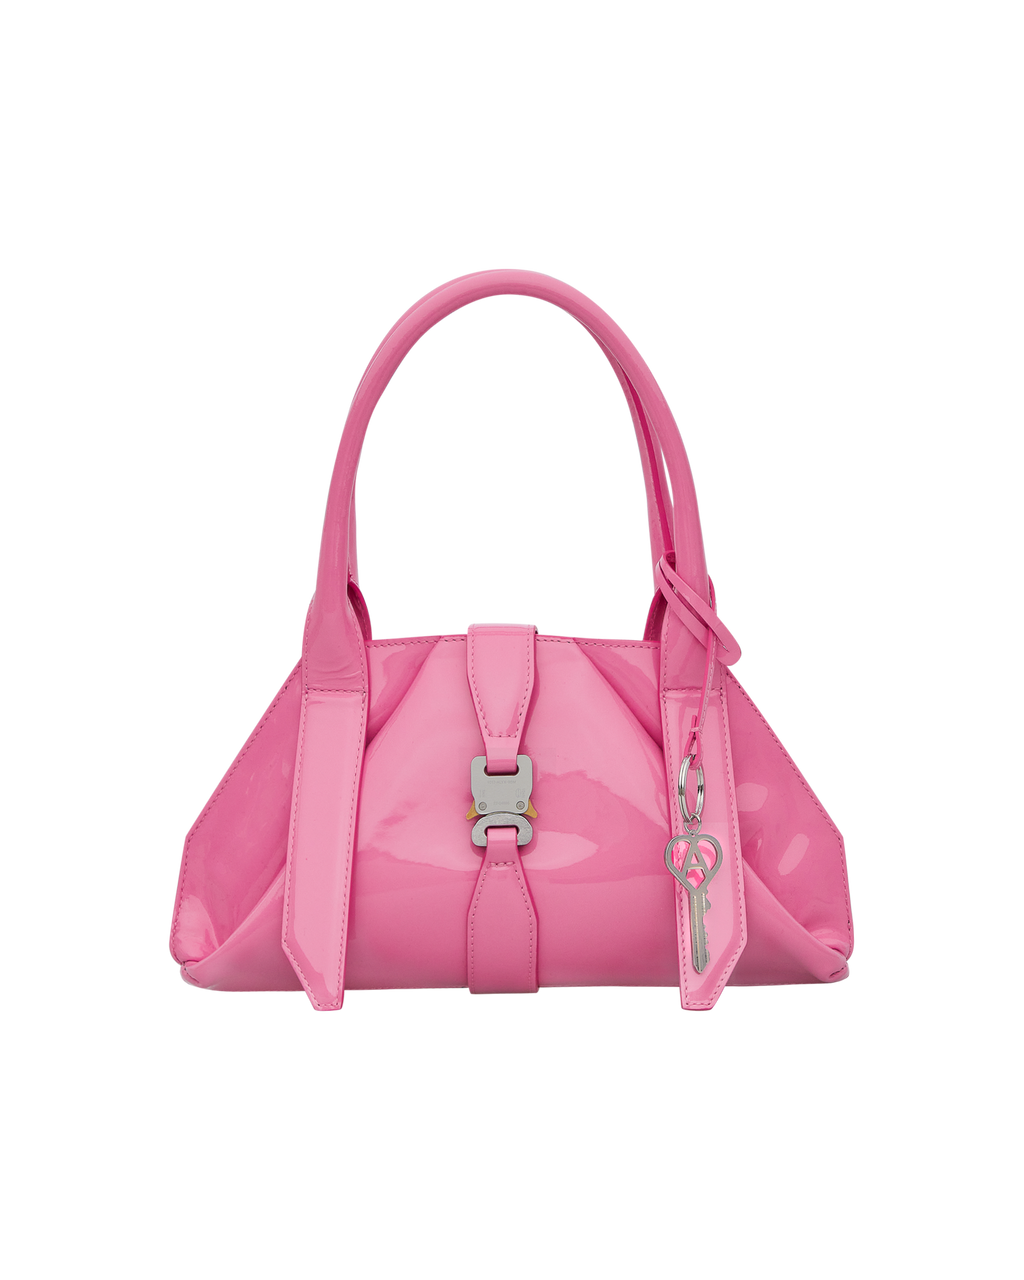 Buy Baguette Style Bag Online In India -  India